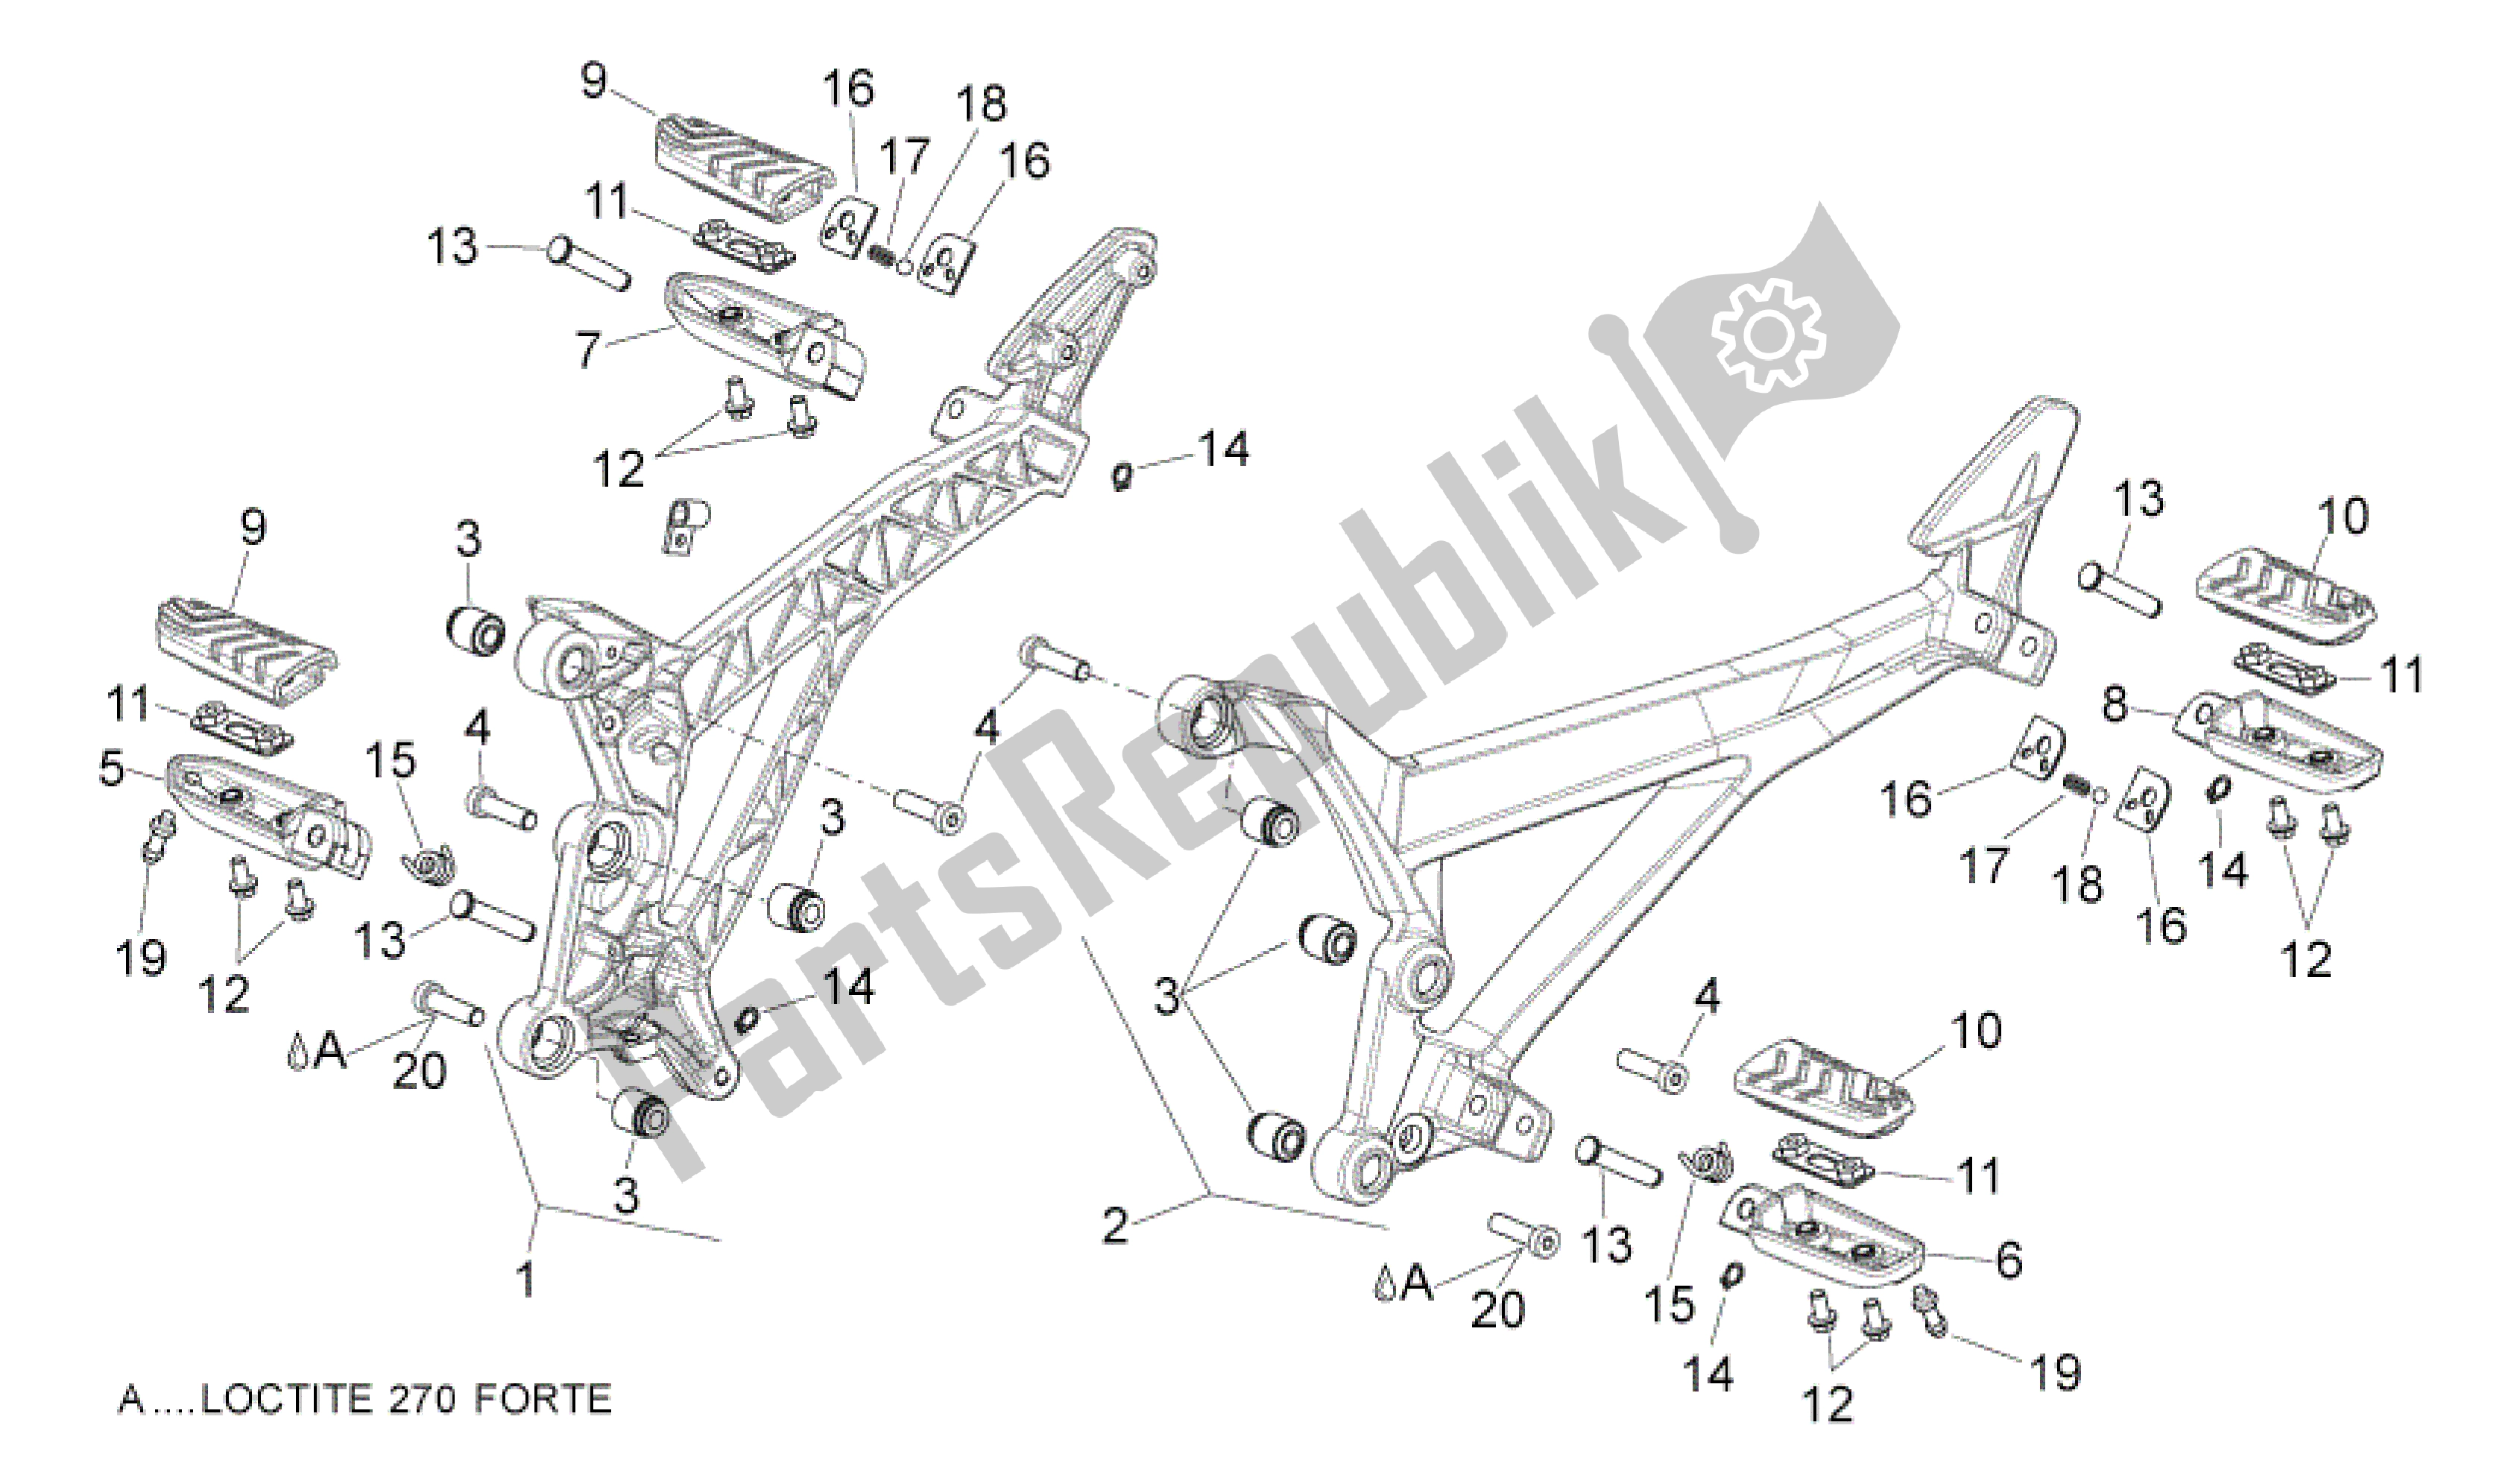 All parts for the Foot Rests of the Aprilia Shiver 750 2007 - 2009